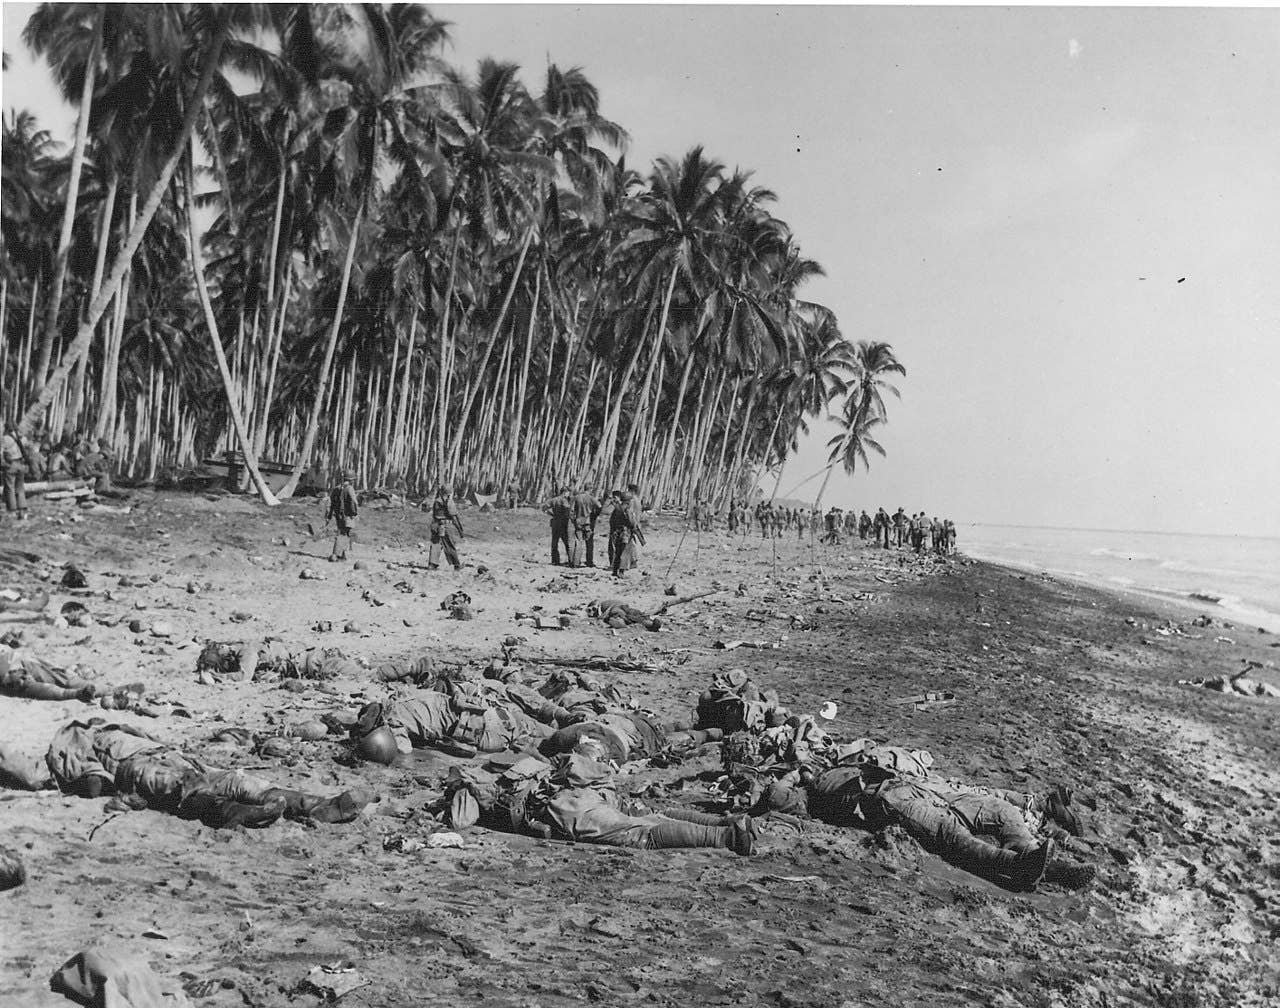 Deceased Japanese soldiers lie on the sandbar at the mouth of Alligator Creek on Guadalcanal on 21 August 1942 after being killed by U.S. Marines during the Battle of the Tenaru. (Wikimedia Commons)